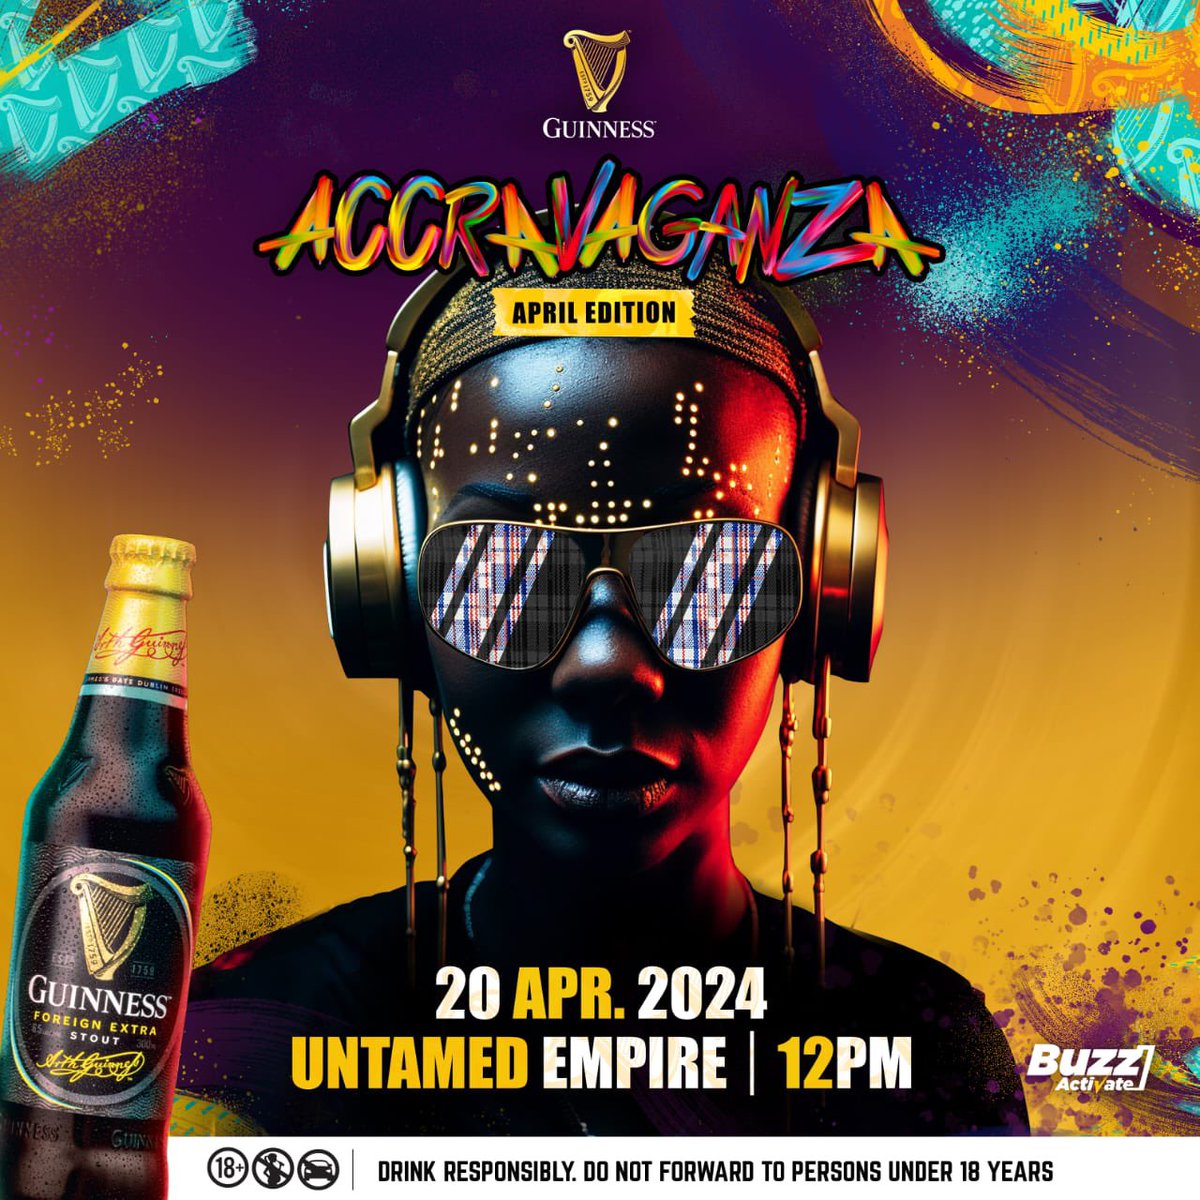 Make your Saturday unforgettable. 

See you today at the Untamed Empire for the Guinness Accravaganza.

#GuinnessAccravaganza